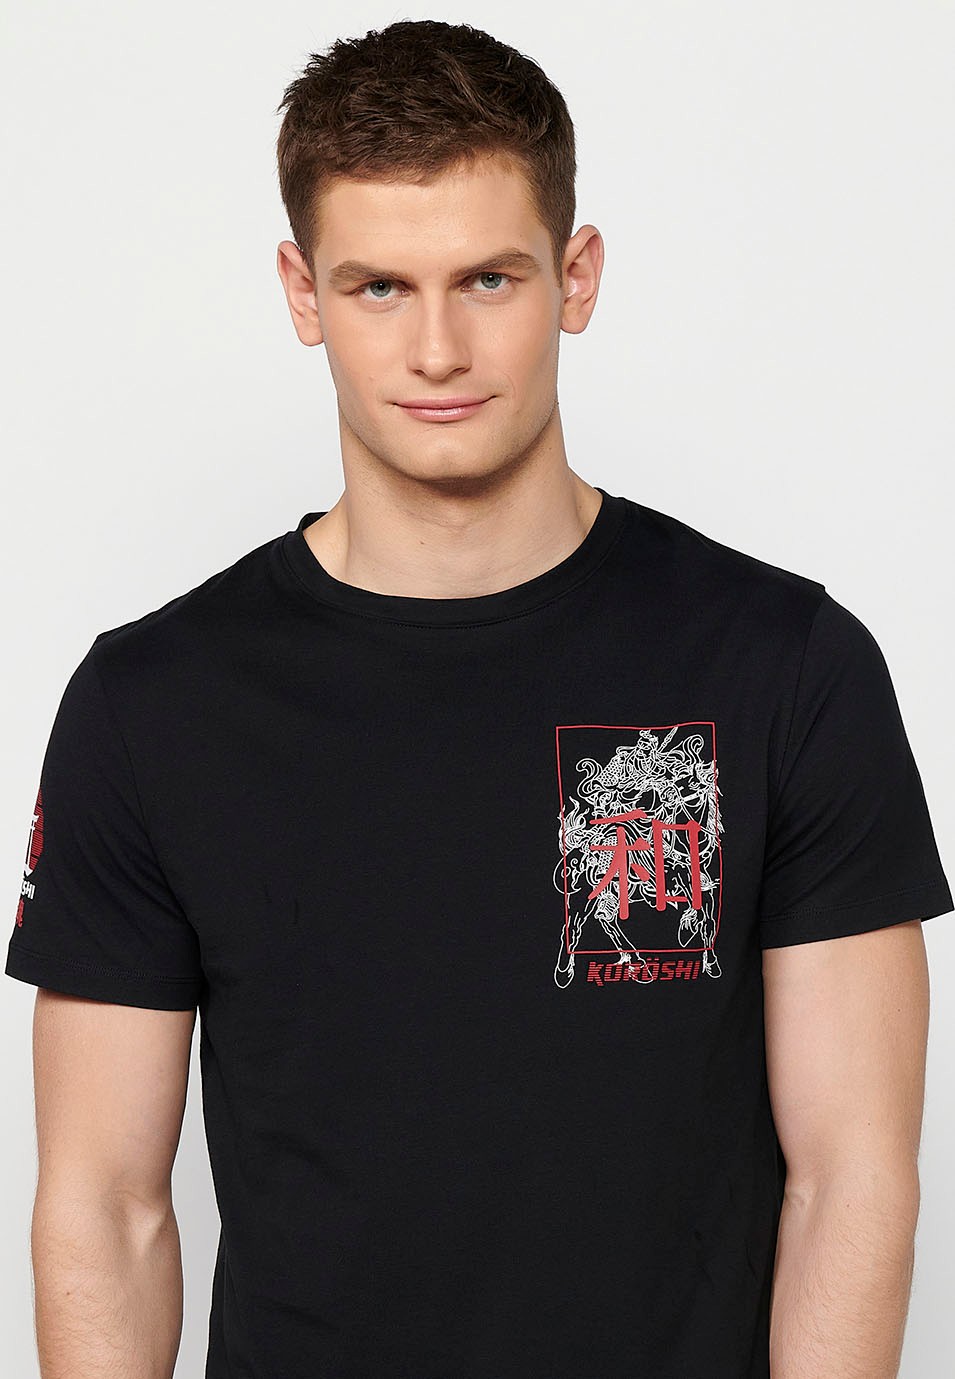 Short sleeve t-shirt with print on the back in black for men